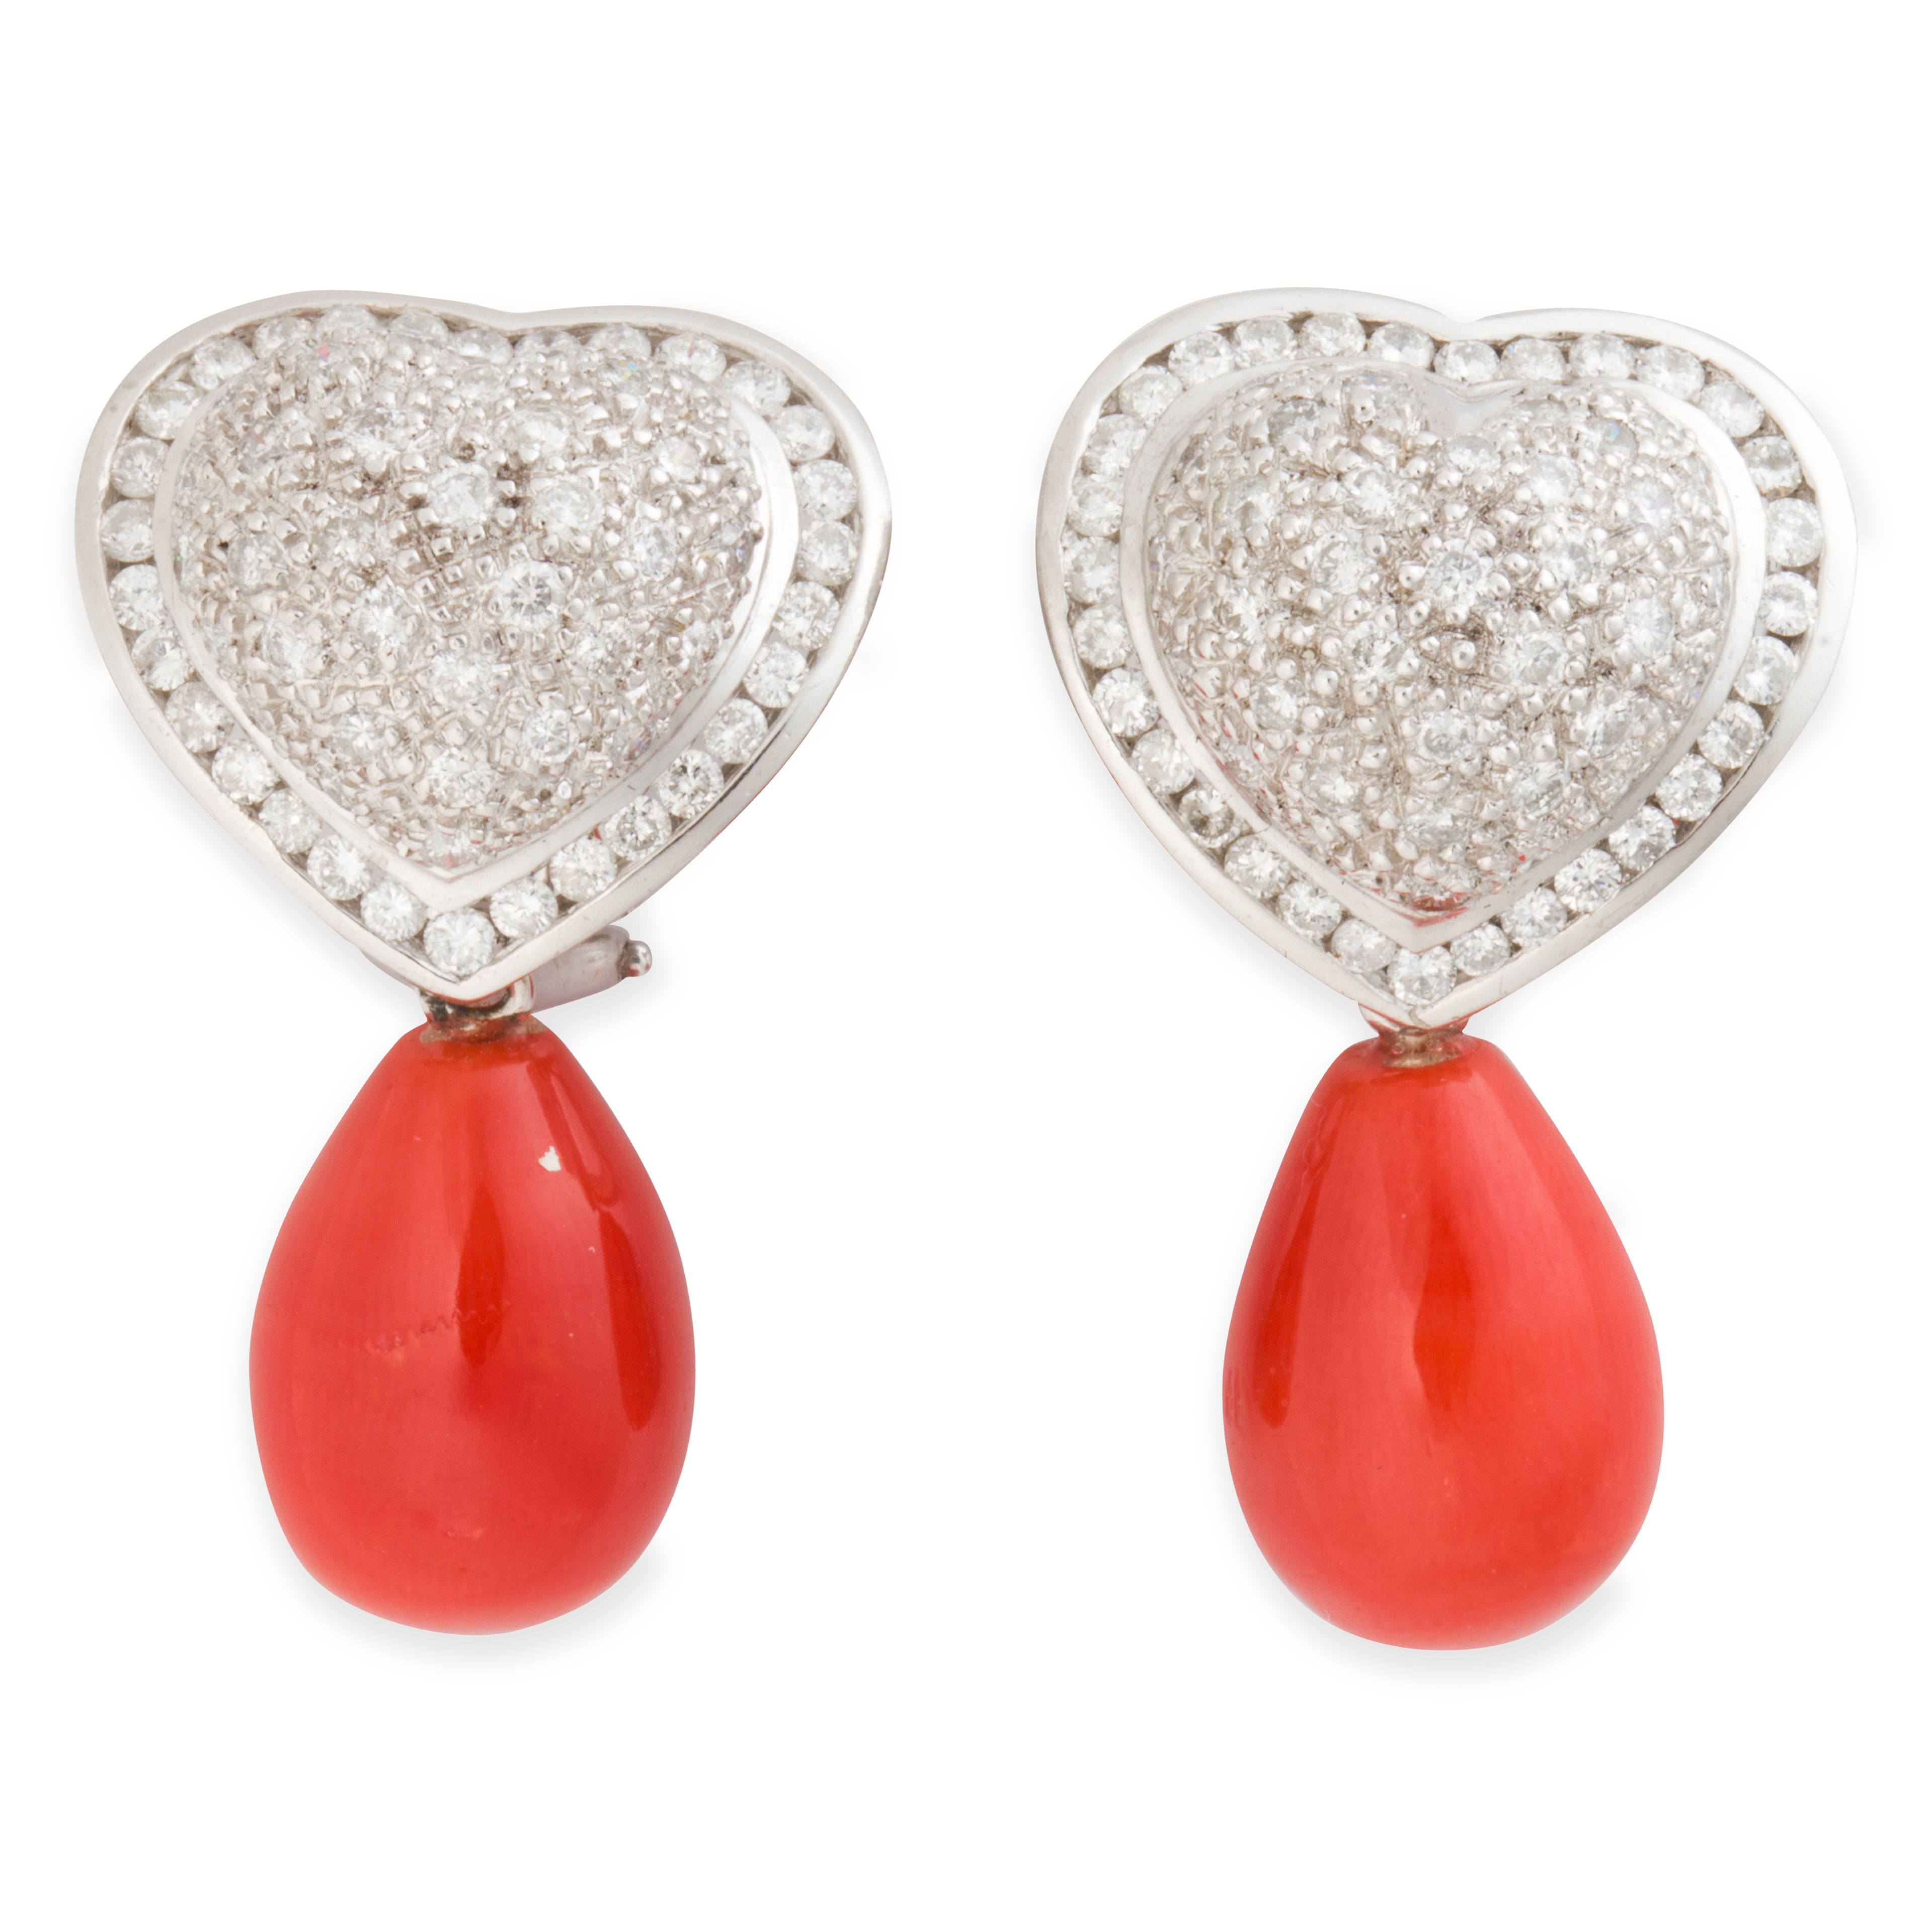 A PAIR OF CORAL DIAMOND AND PLATINUM 3a639b